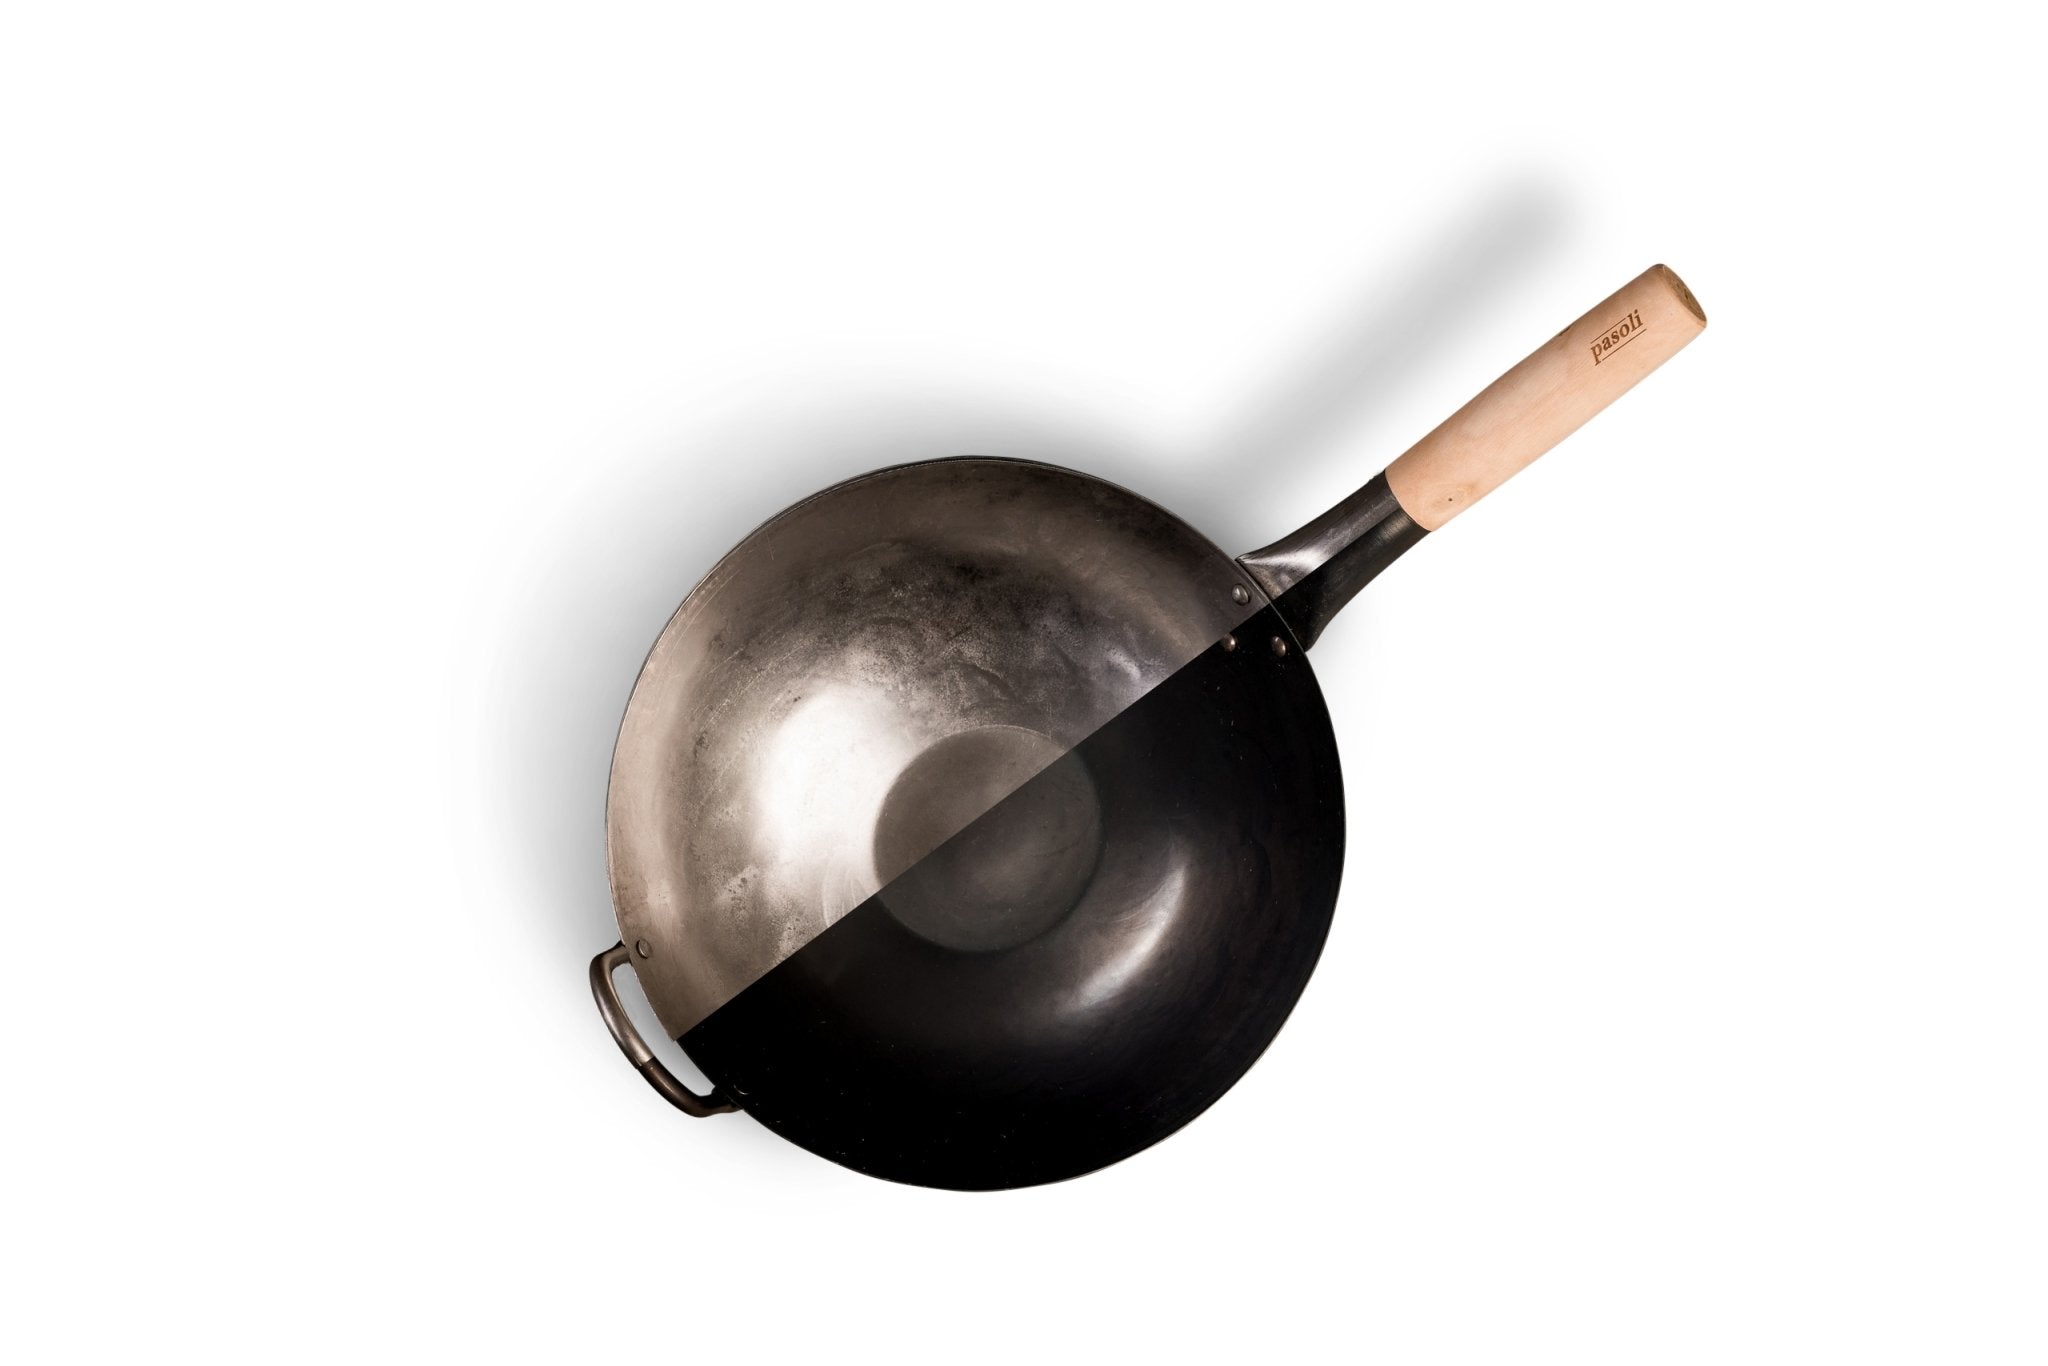 How to use Pre-Seasoned Carbon Steel wok first time? and How to care for it  after. 